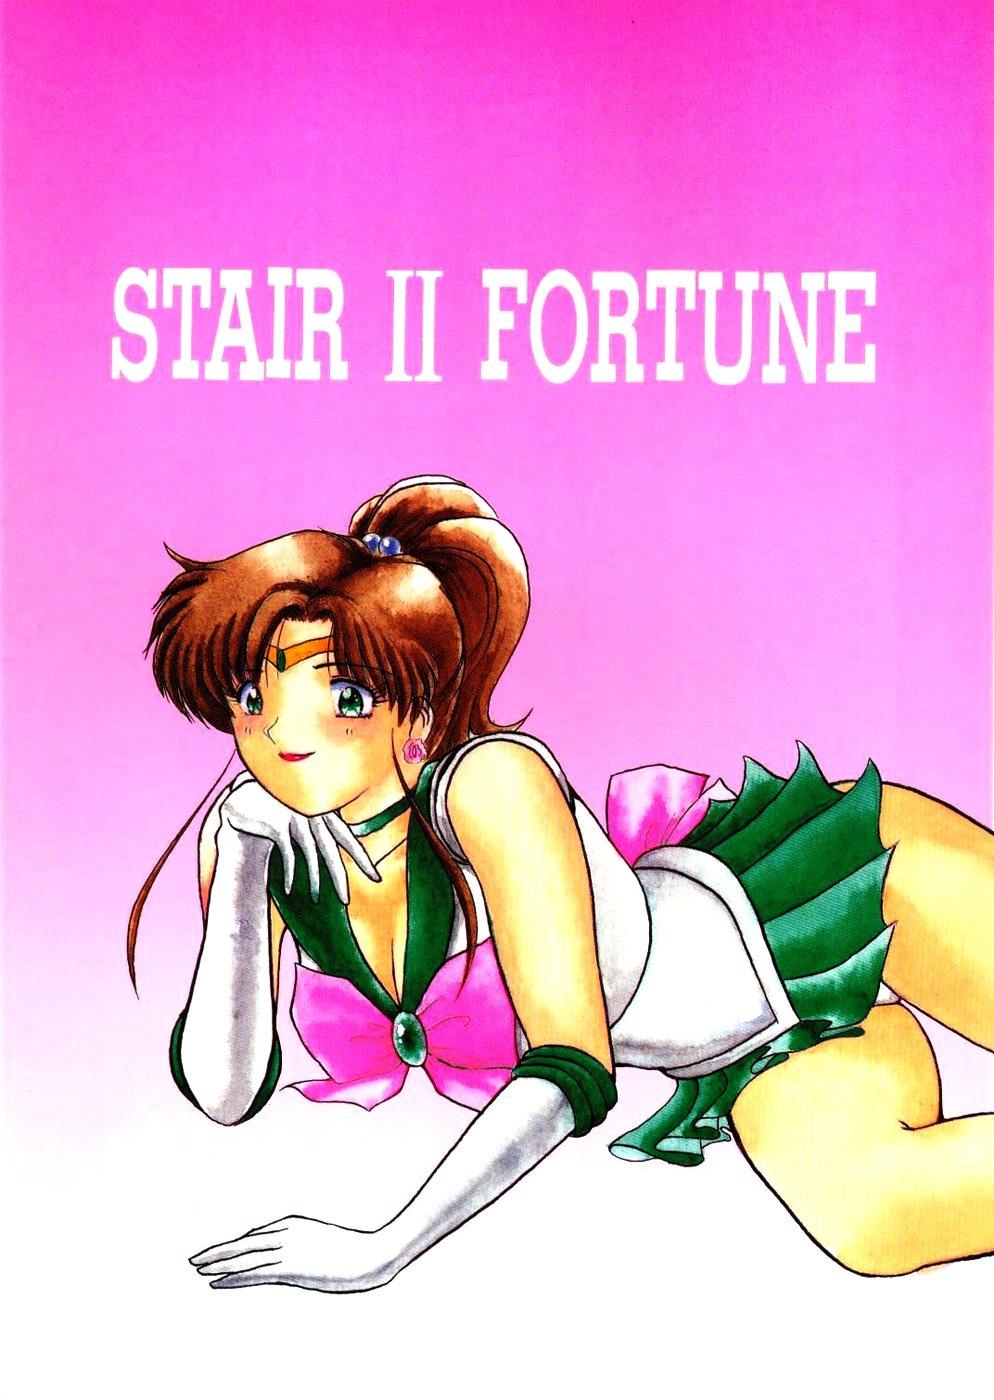 Argentino STAIR II FORTUNE - Sailor moon Boobs - Page 1